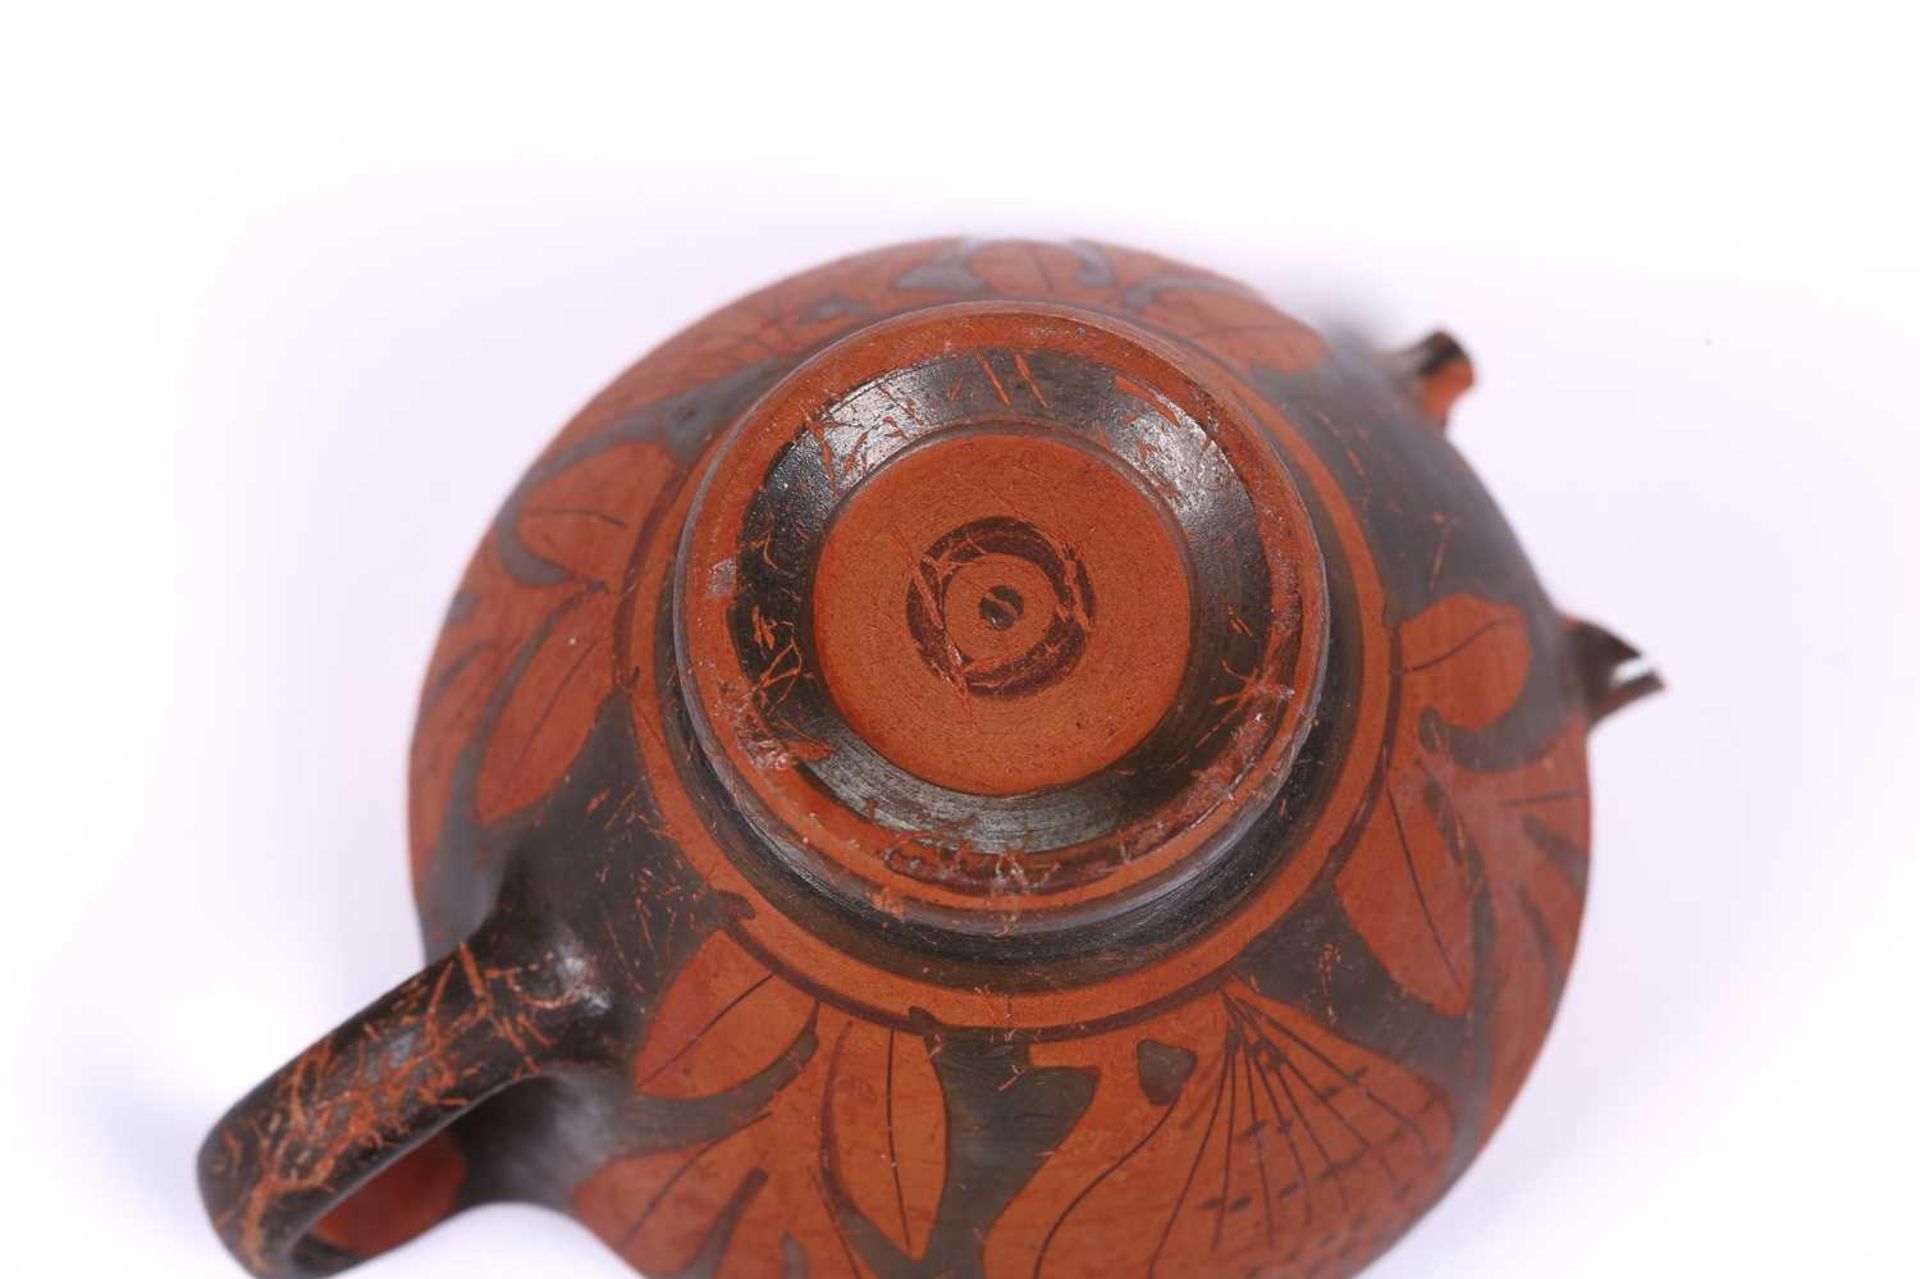 An Athenian-style ritual cup, 4th century BC or later, decorated with the "Owl of Athena" amidst - Image 7 of 8